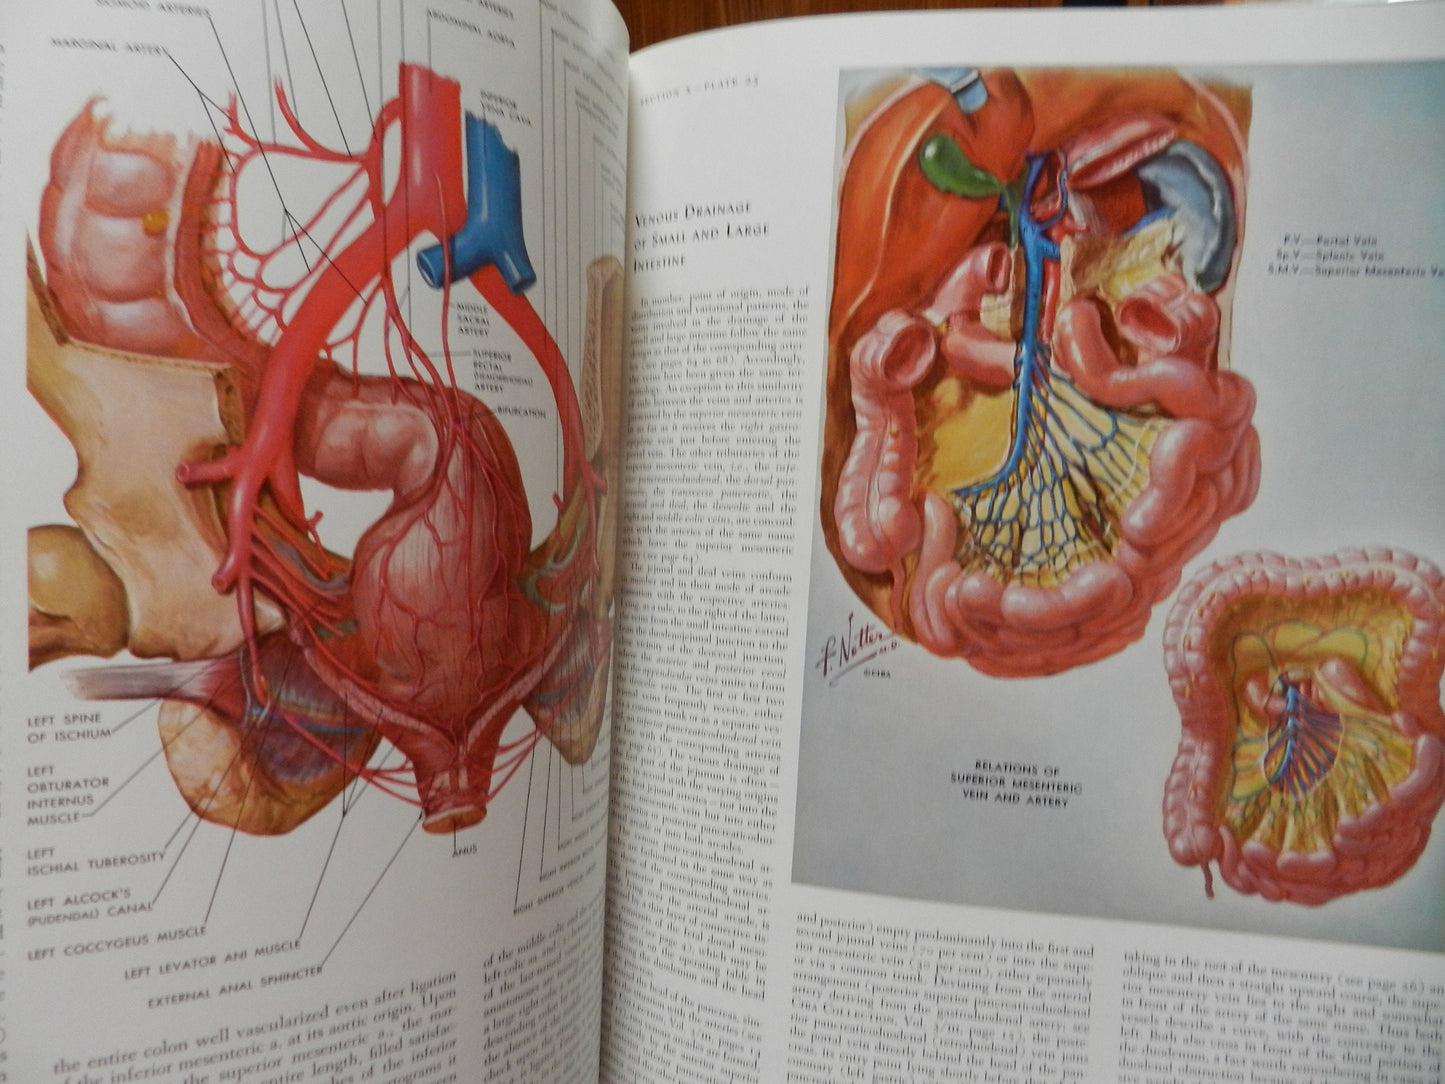 Vintage Medical Book " The Ciba Collection of Medical Illustrations - Digestive System" By Netter - 1983  2 Volumes